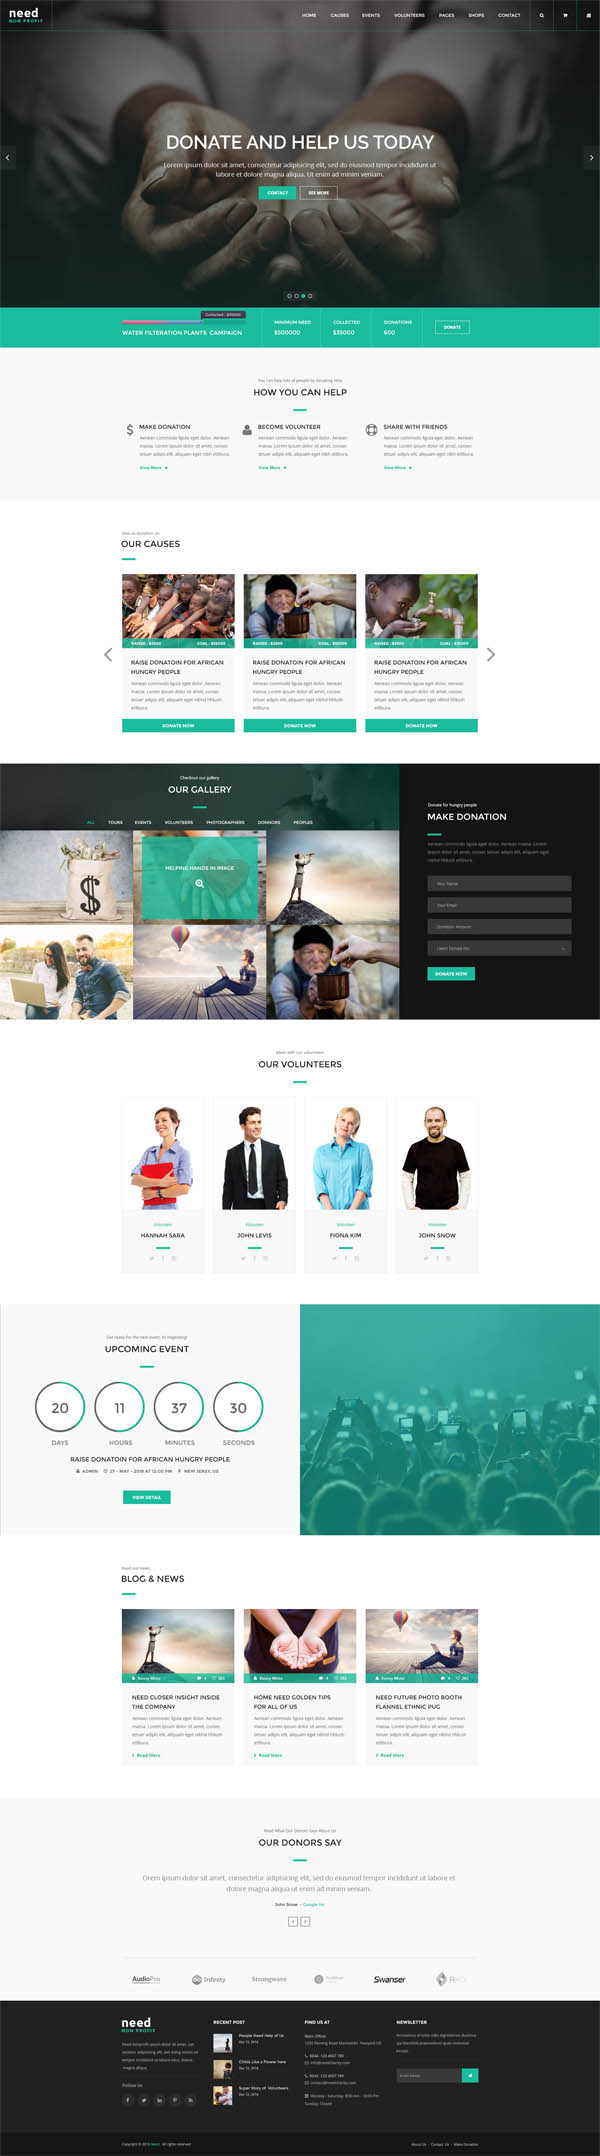 Need - Nonprofit Charity Donation HTML Template